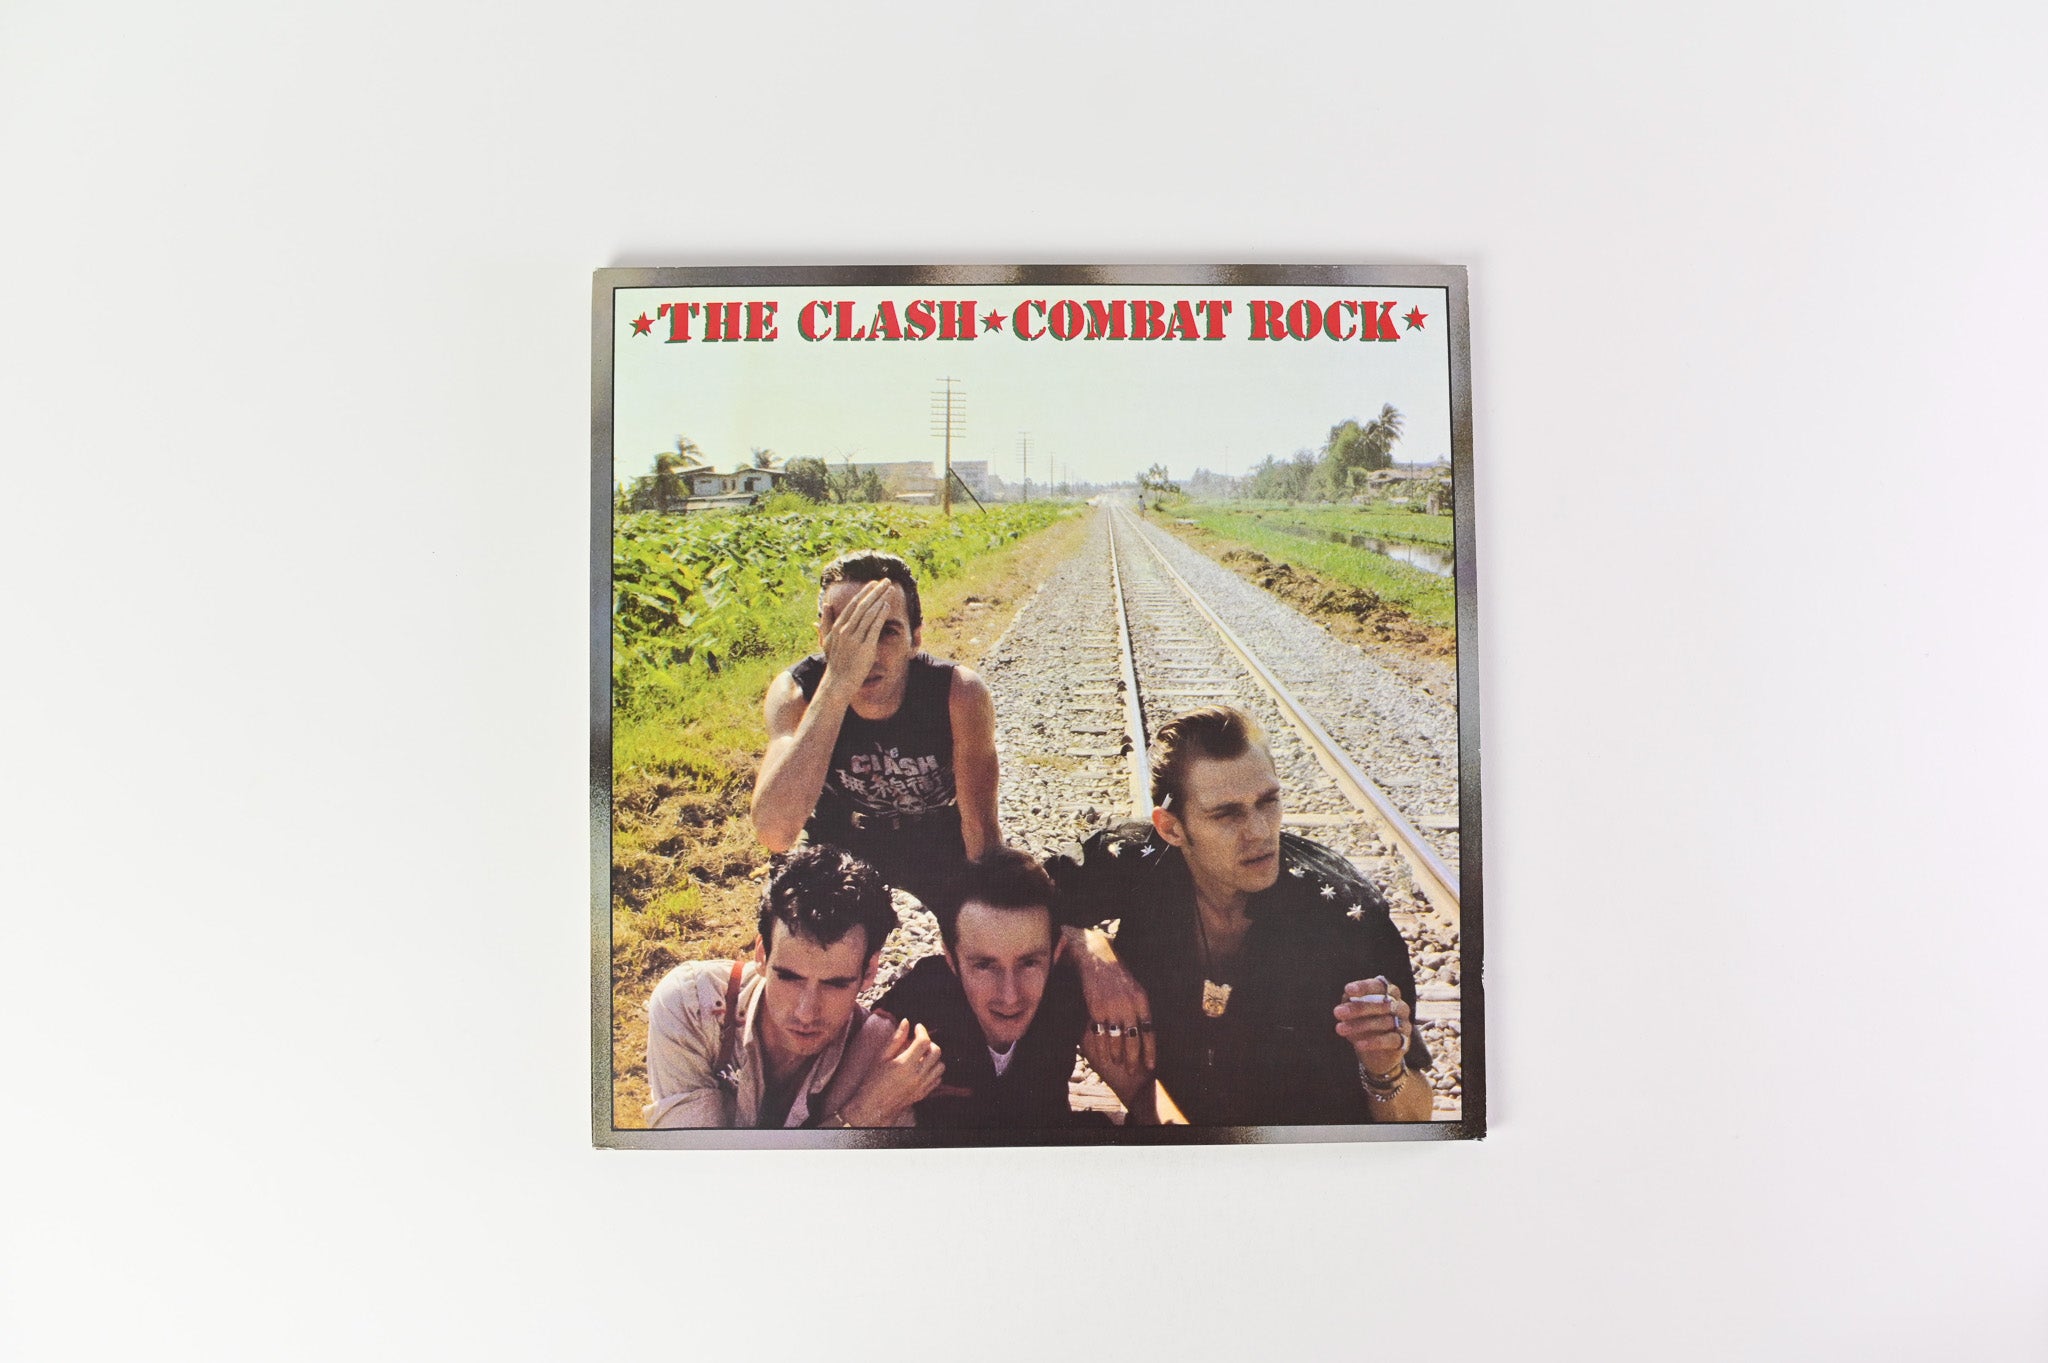 The Clash - Combat Rock + The People's Hall on Epic Special Edition Reissue